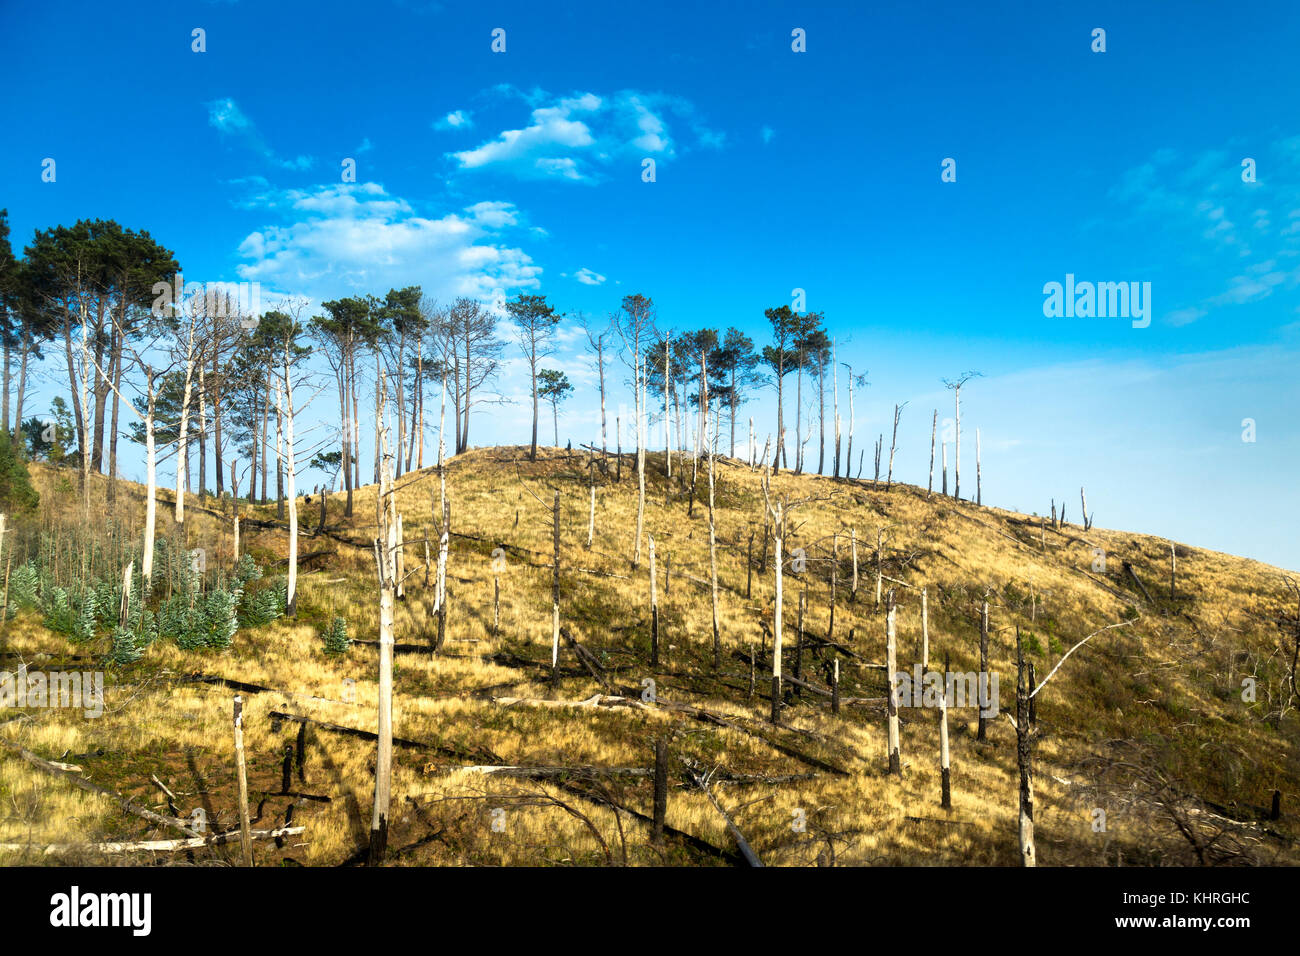 Damaged trees and stumps at the Ecological Park (Parque Ecologico do Funchal) in Madeira, Portugal Stock Photo